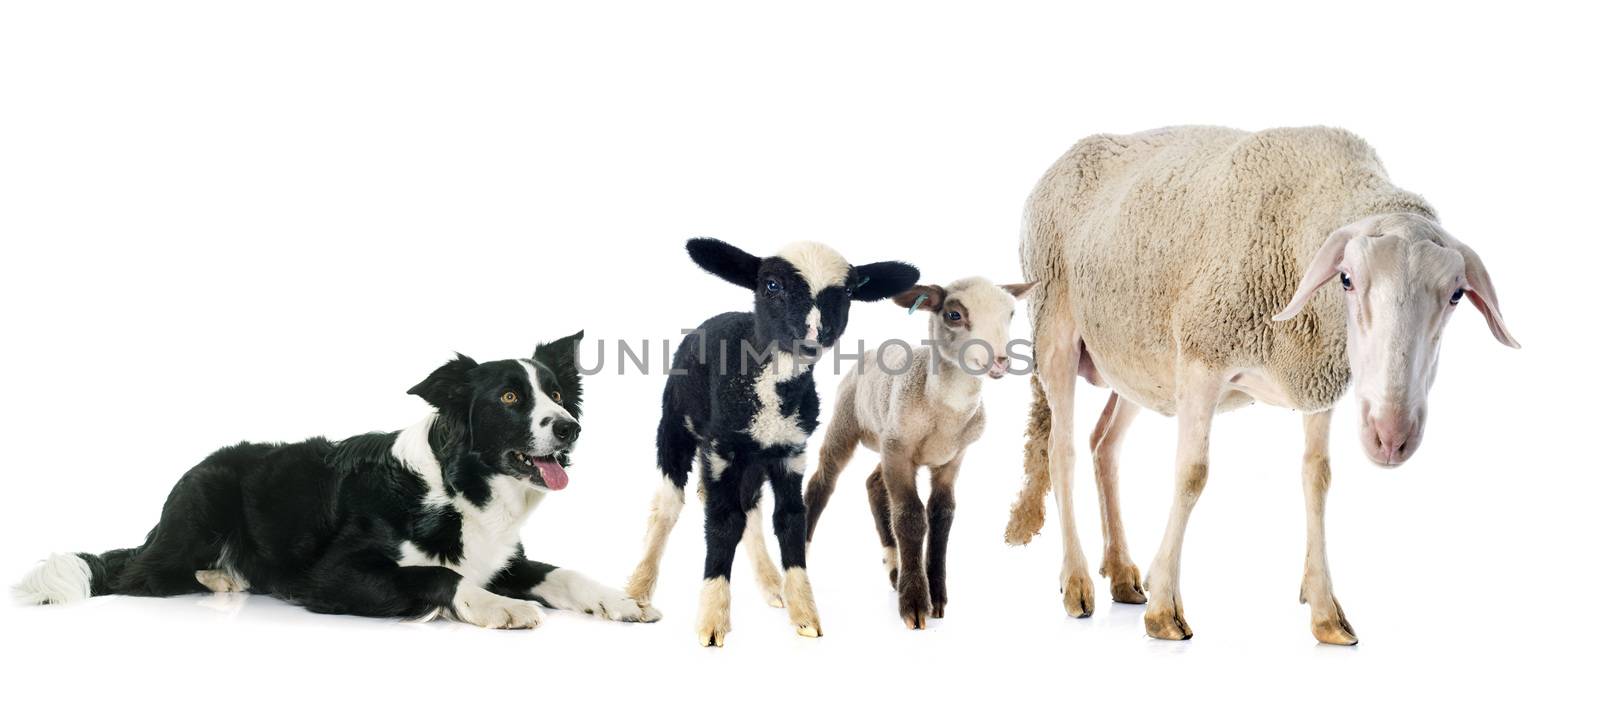 border collie and sheeps by cynoclub